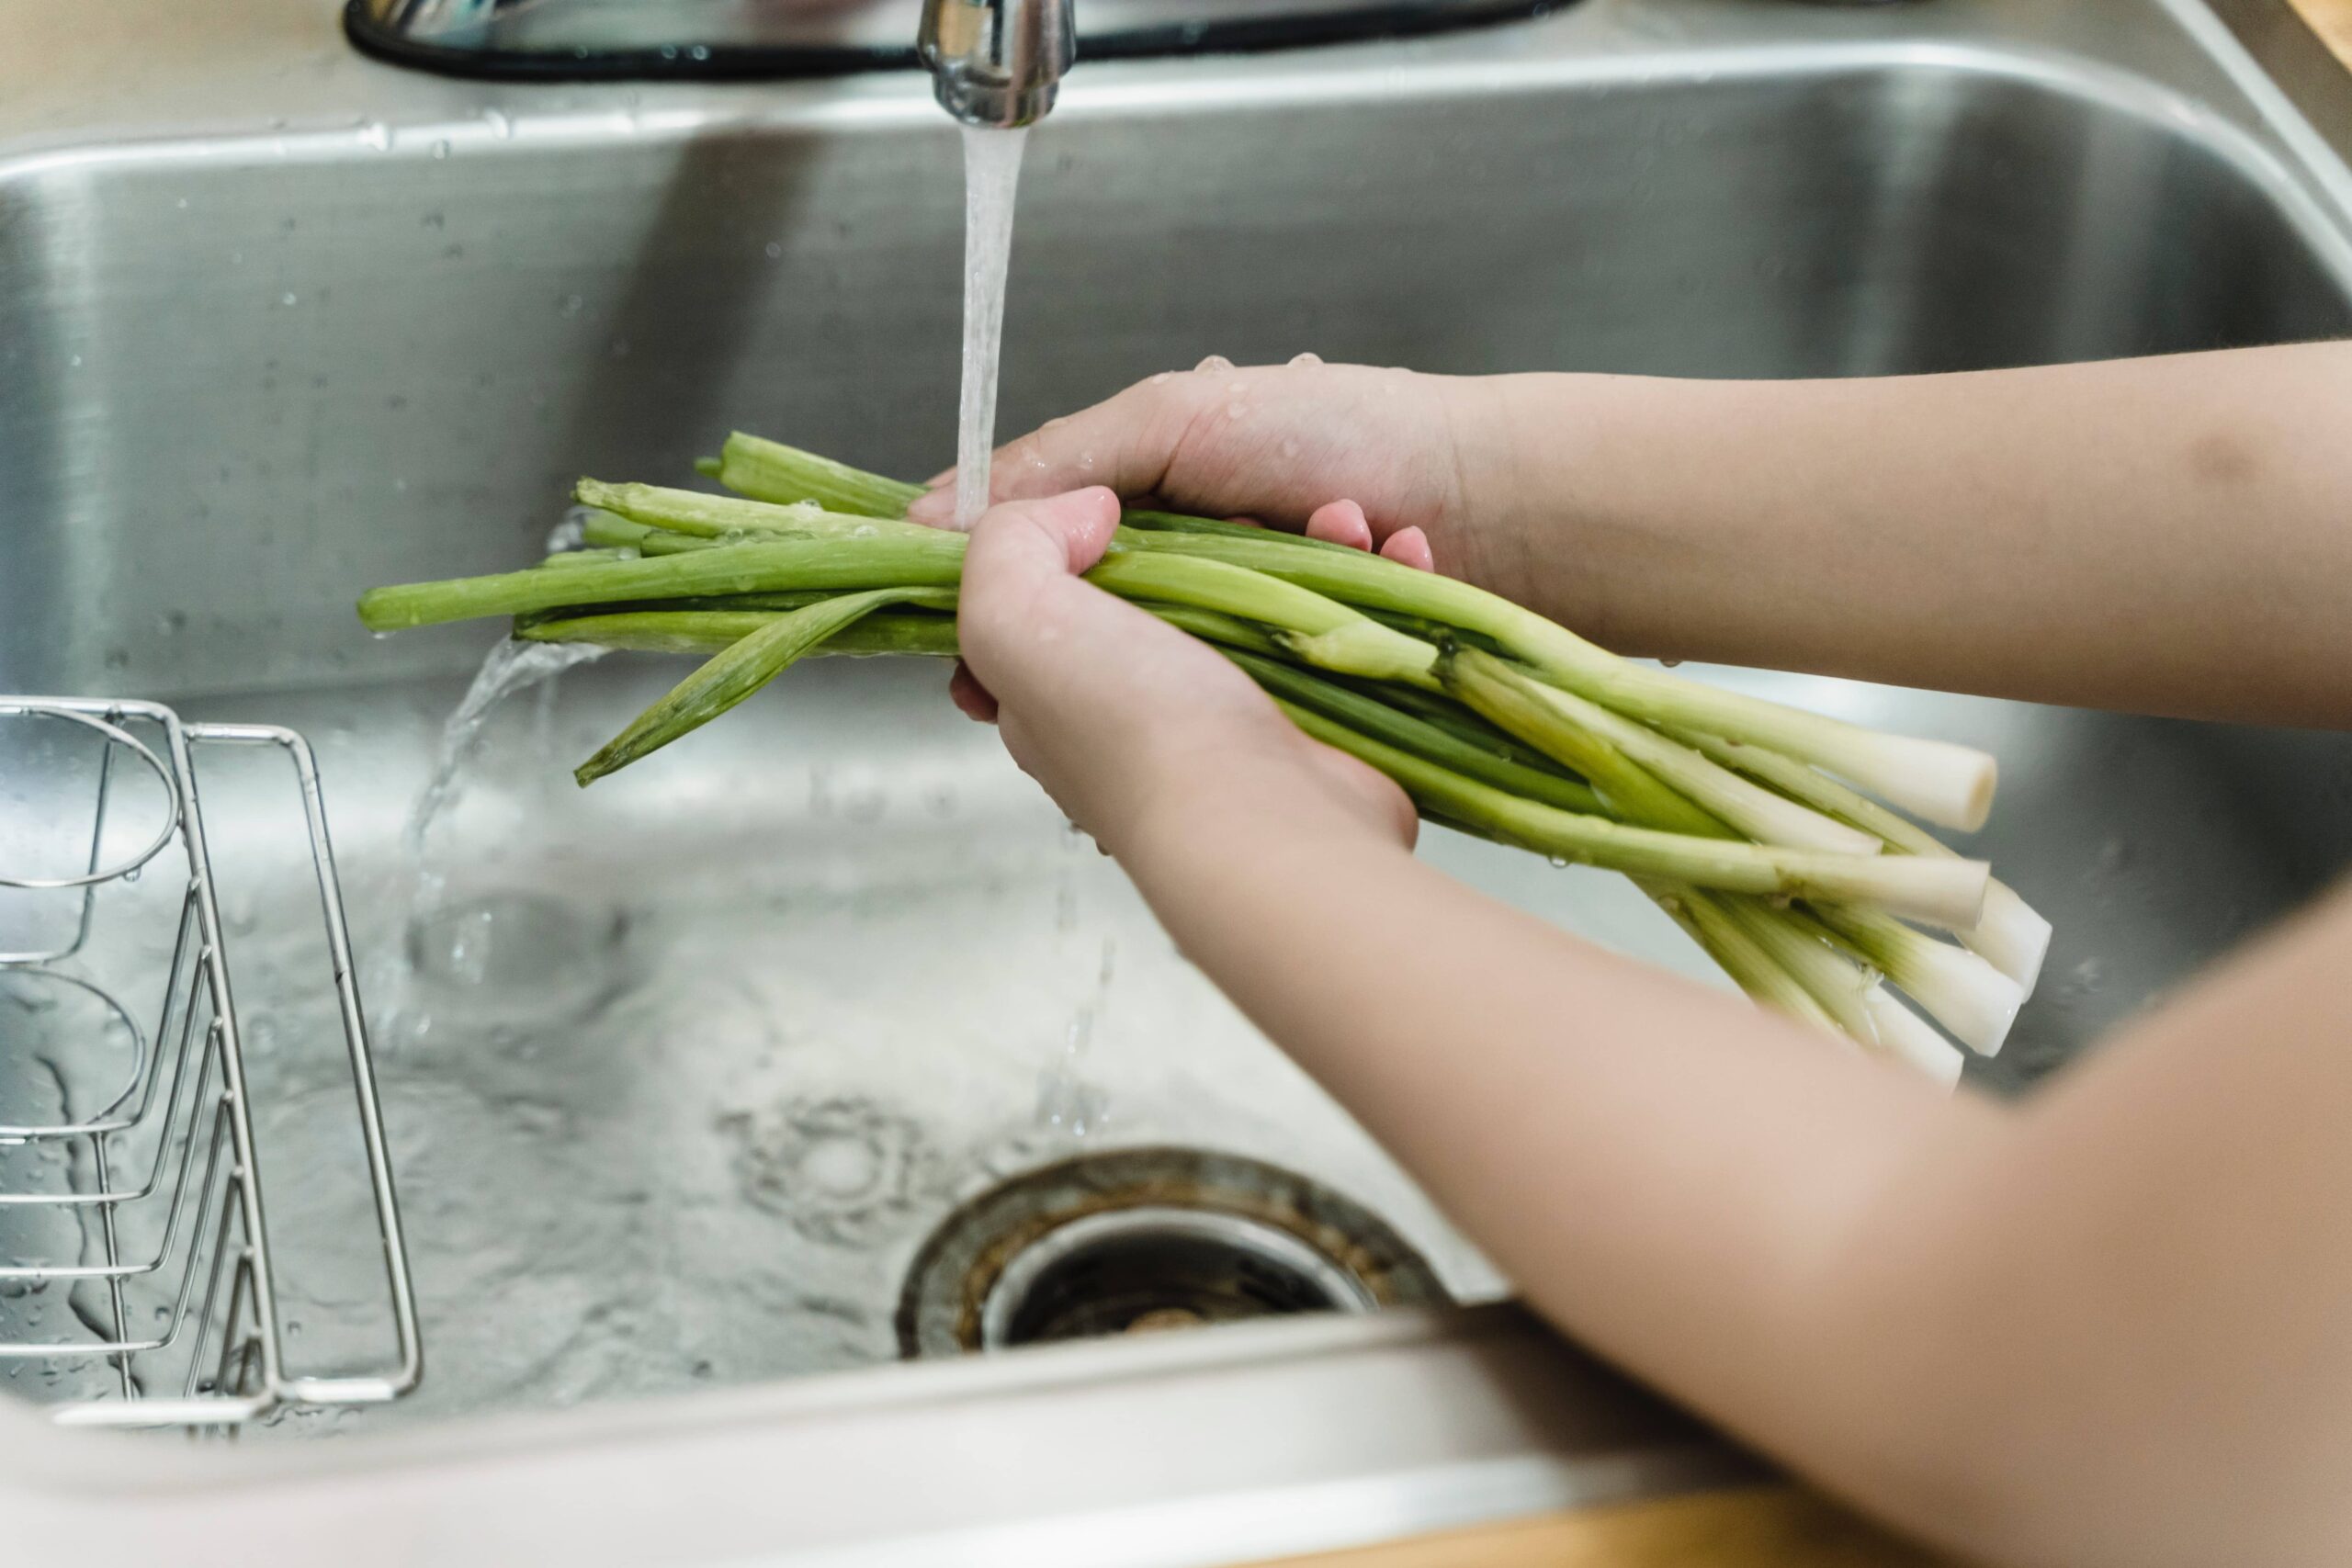 The Relationship Between Personal Hygiene and Food Safety